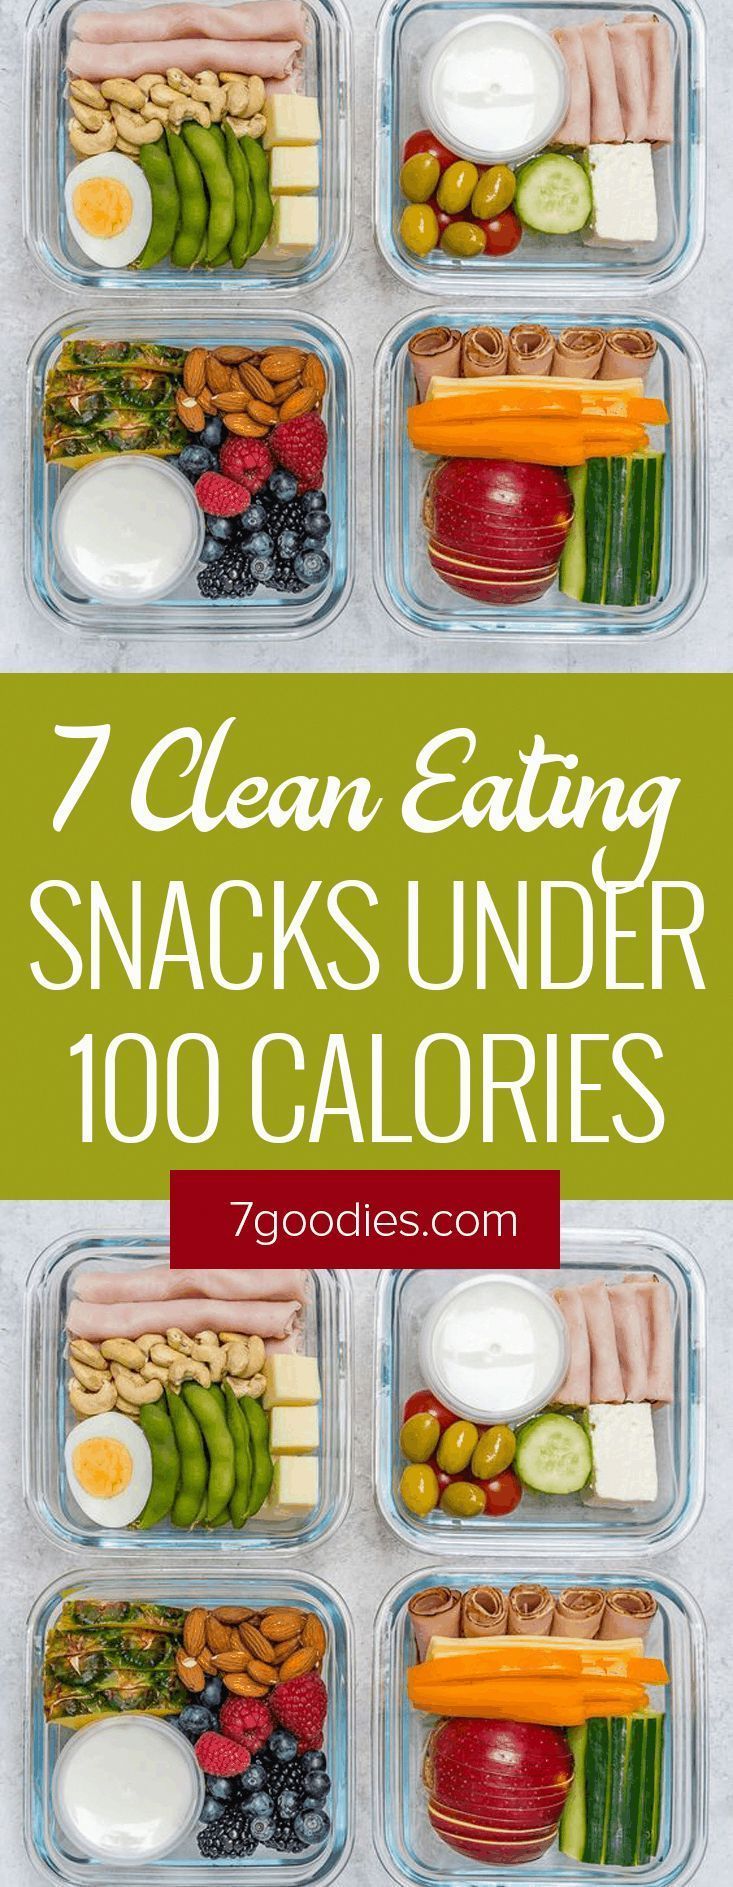 7 Healthy Snacks Under 100 Calories For Weight Loss -   19 healthy recipes Snacks on the go ideas